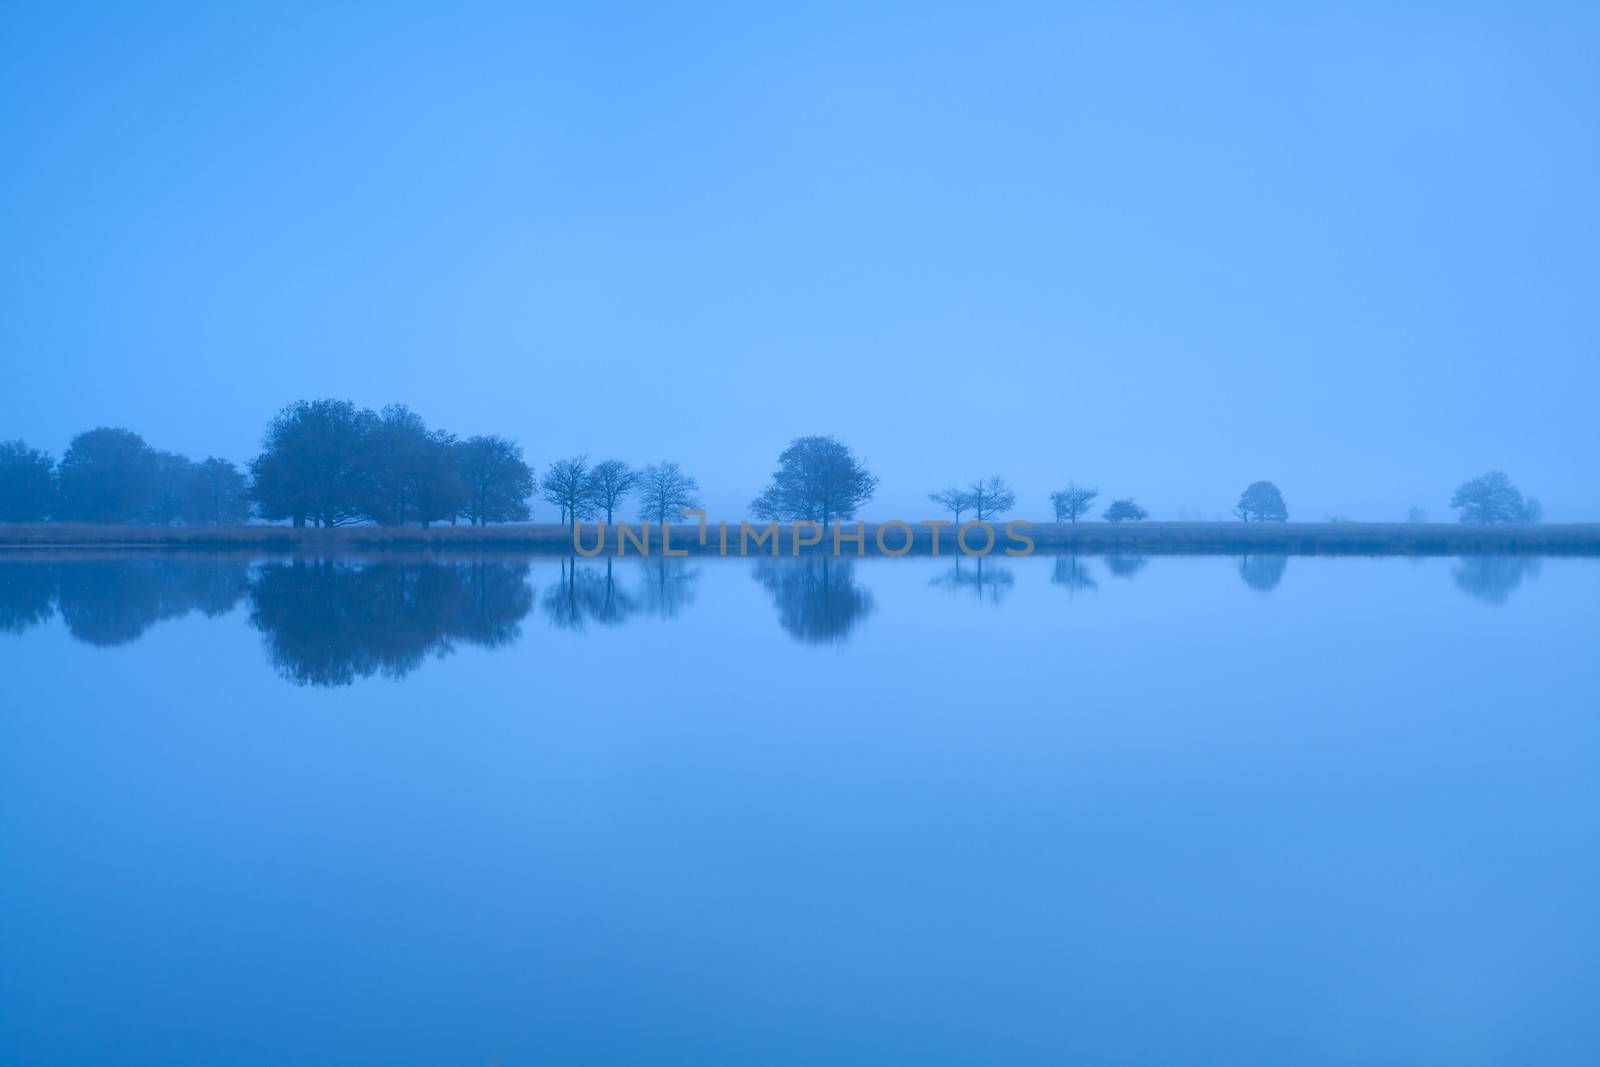 tree reflections in lake water during misty morning by catolla